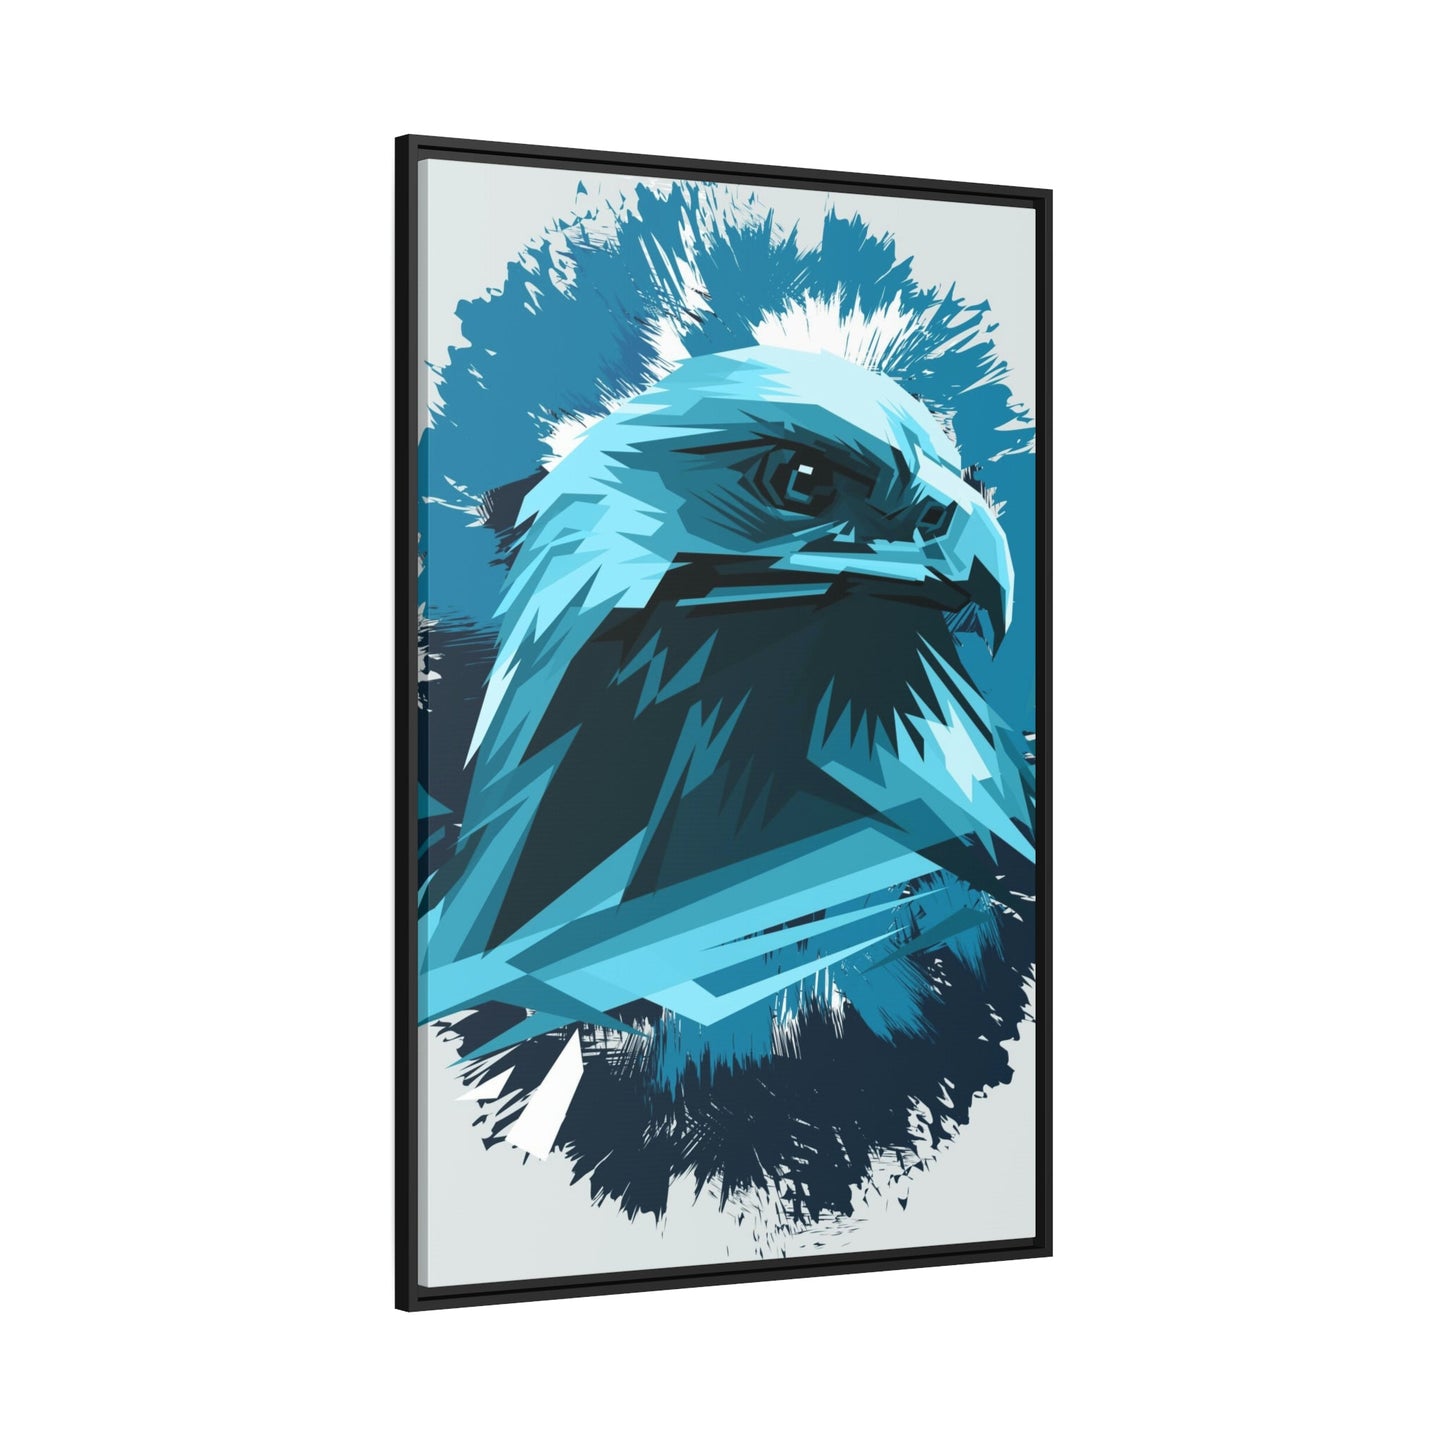 Eagle's Resplendence: Canvas Wall Art, Immersing in their Radiant Glory